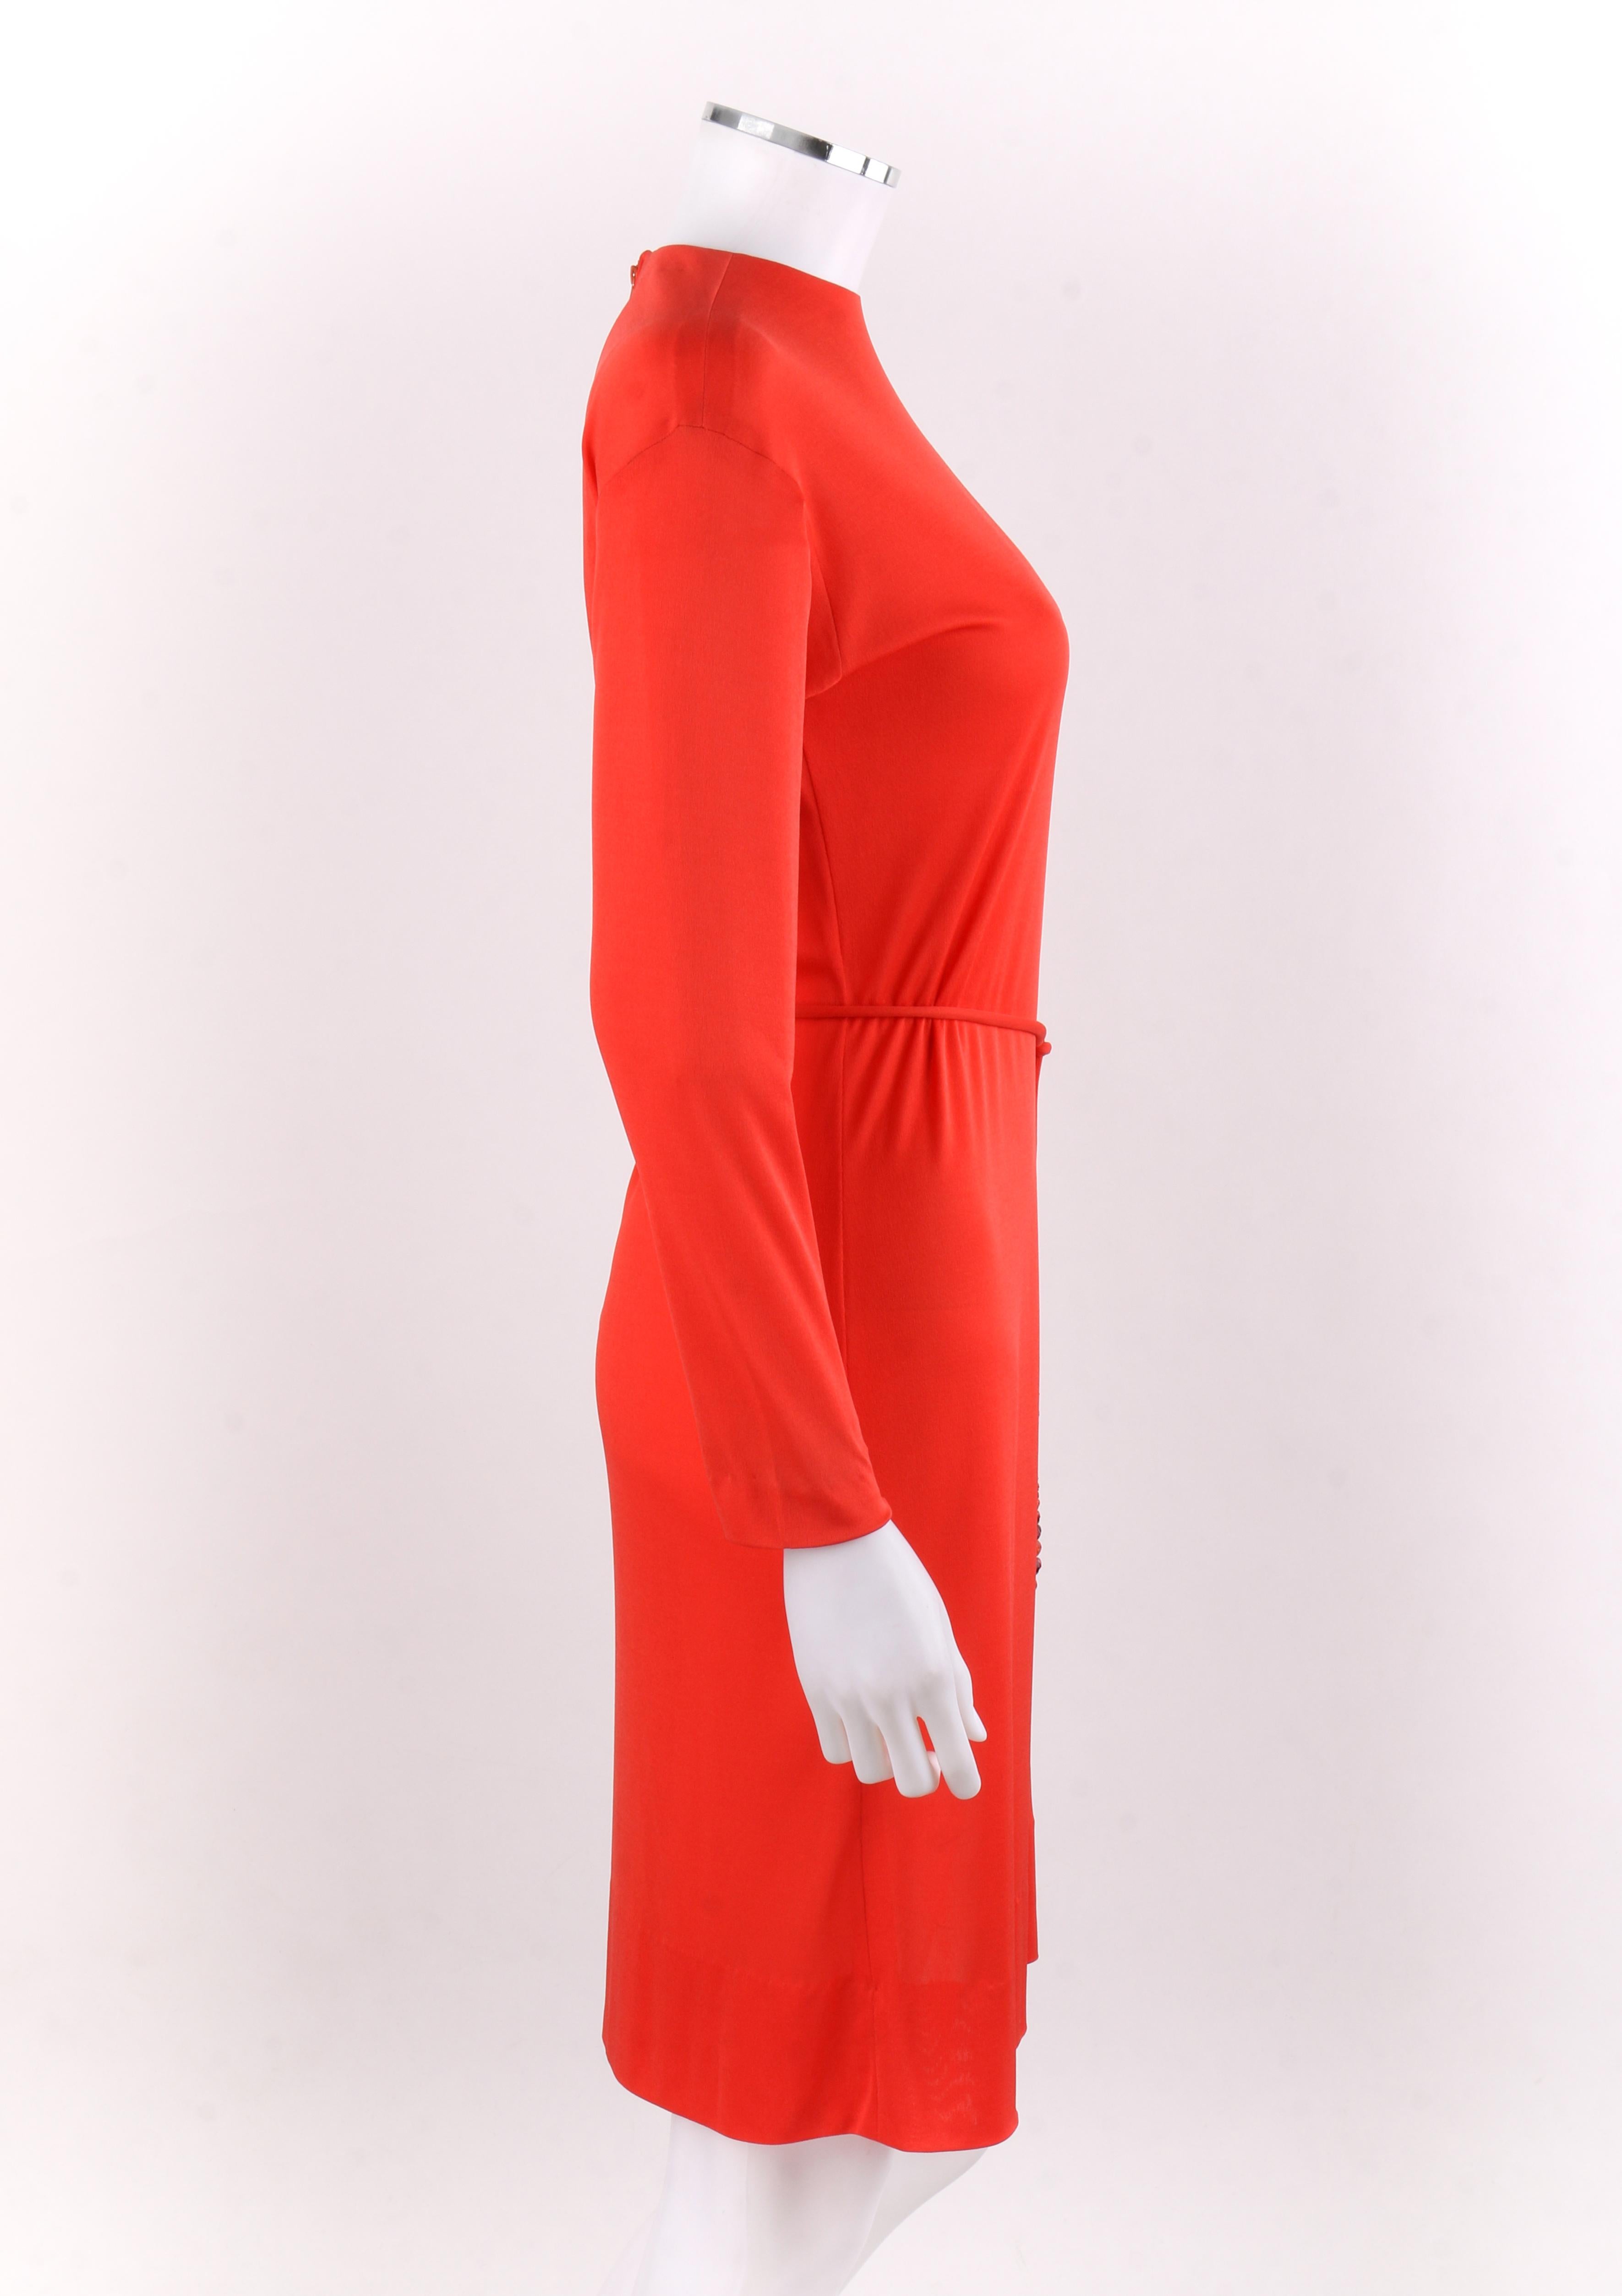 Women's EMILIO PUCCI c.1960’s Coppola E Toppo Belted Scarlet Red Silk Jersey Dress